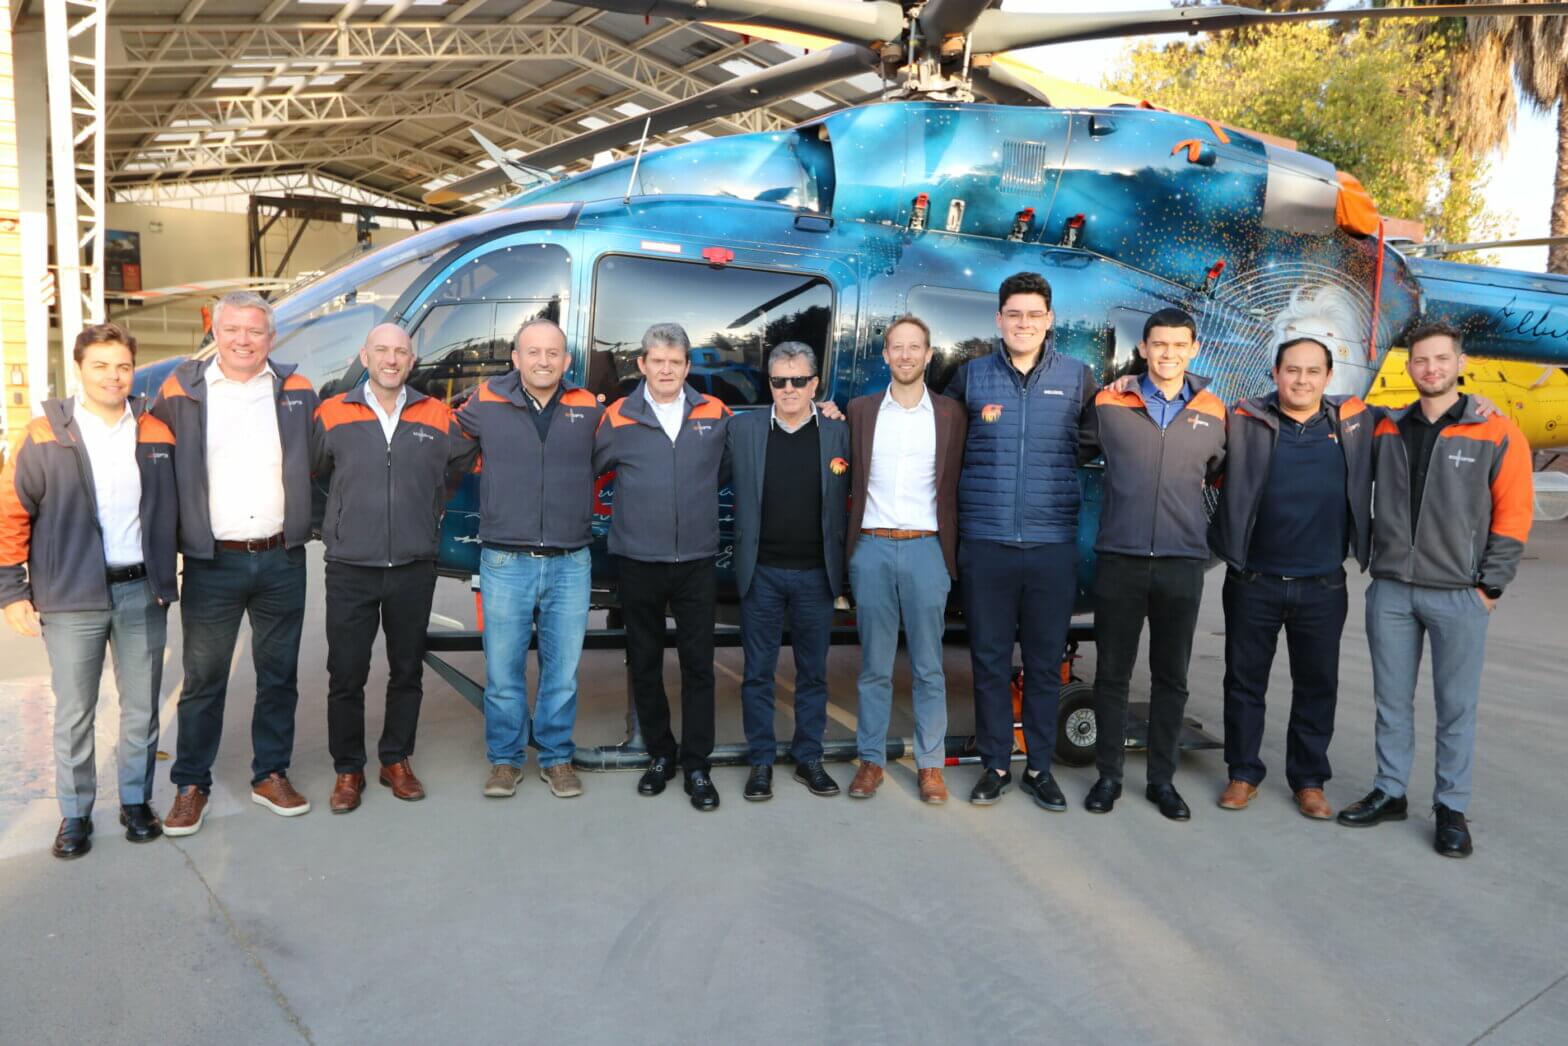 Helisul acquires Ecocopter to create new South American giant